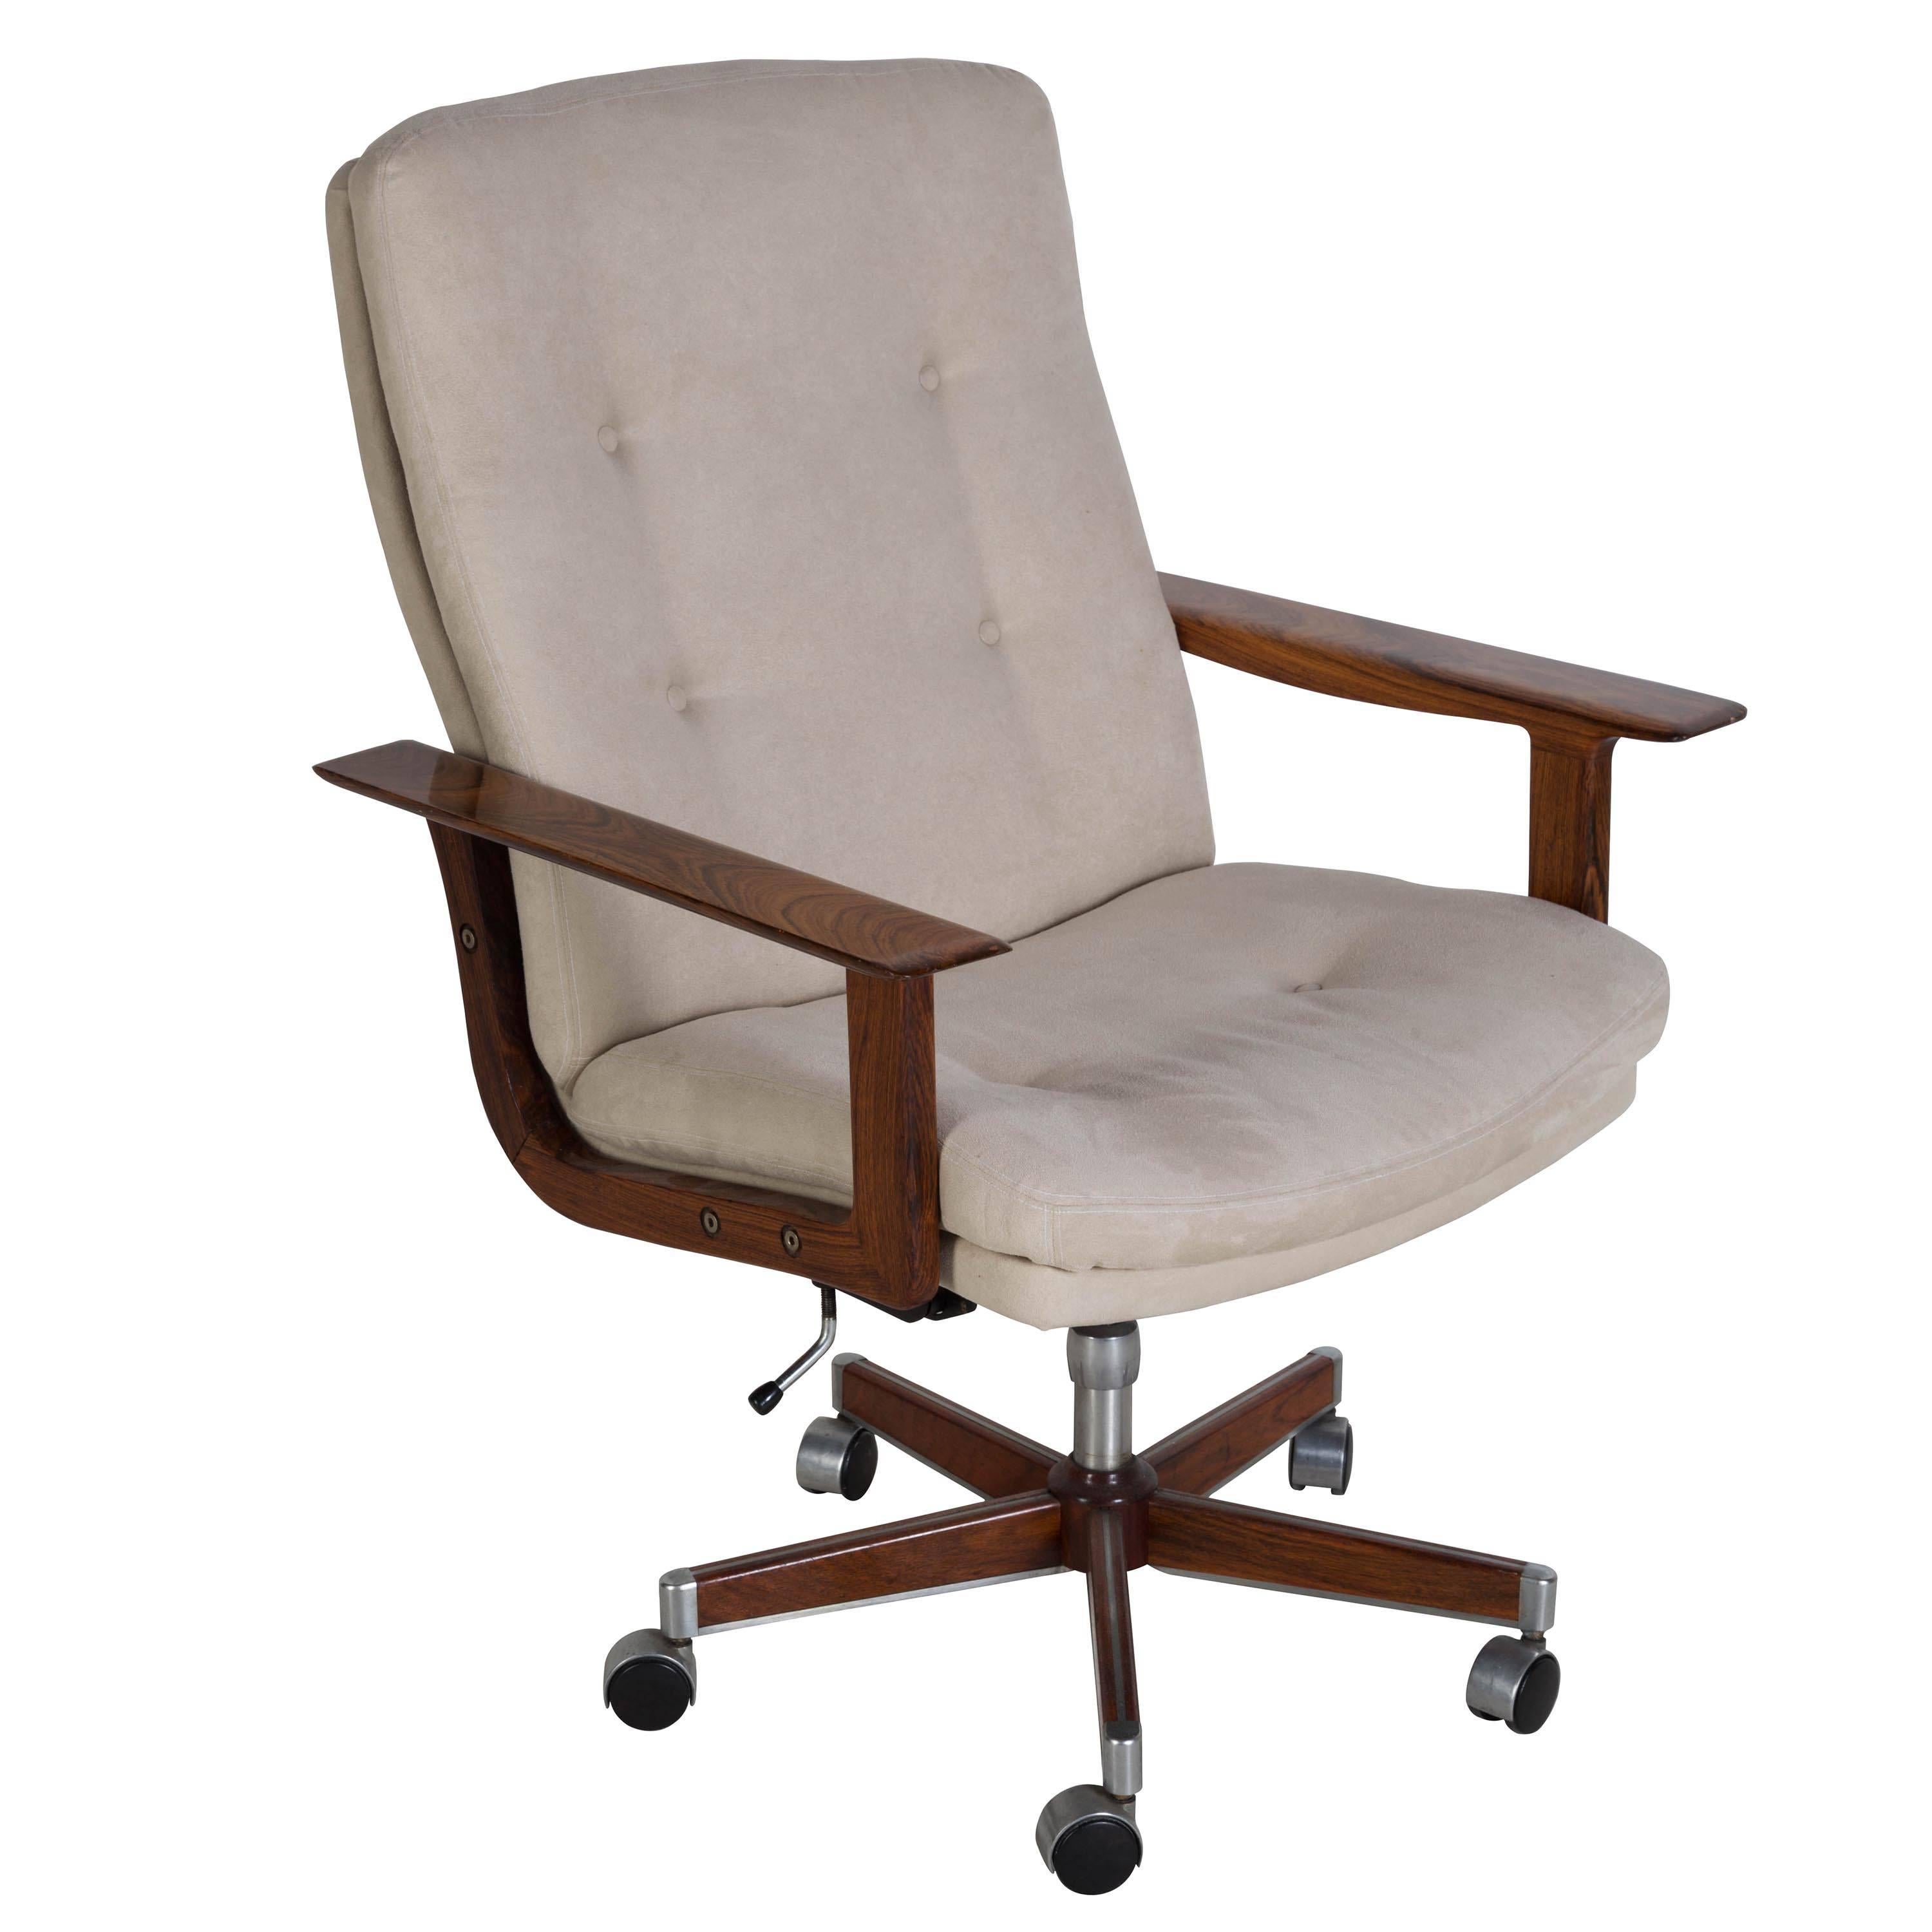 A scarce desk chair by Hans Wegner. Now re-covered in a similar color Alcantara. Seat height 48cm. Seat depth 47cm.